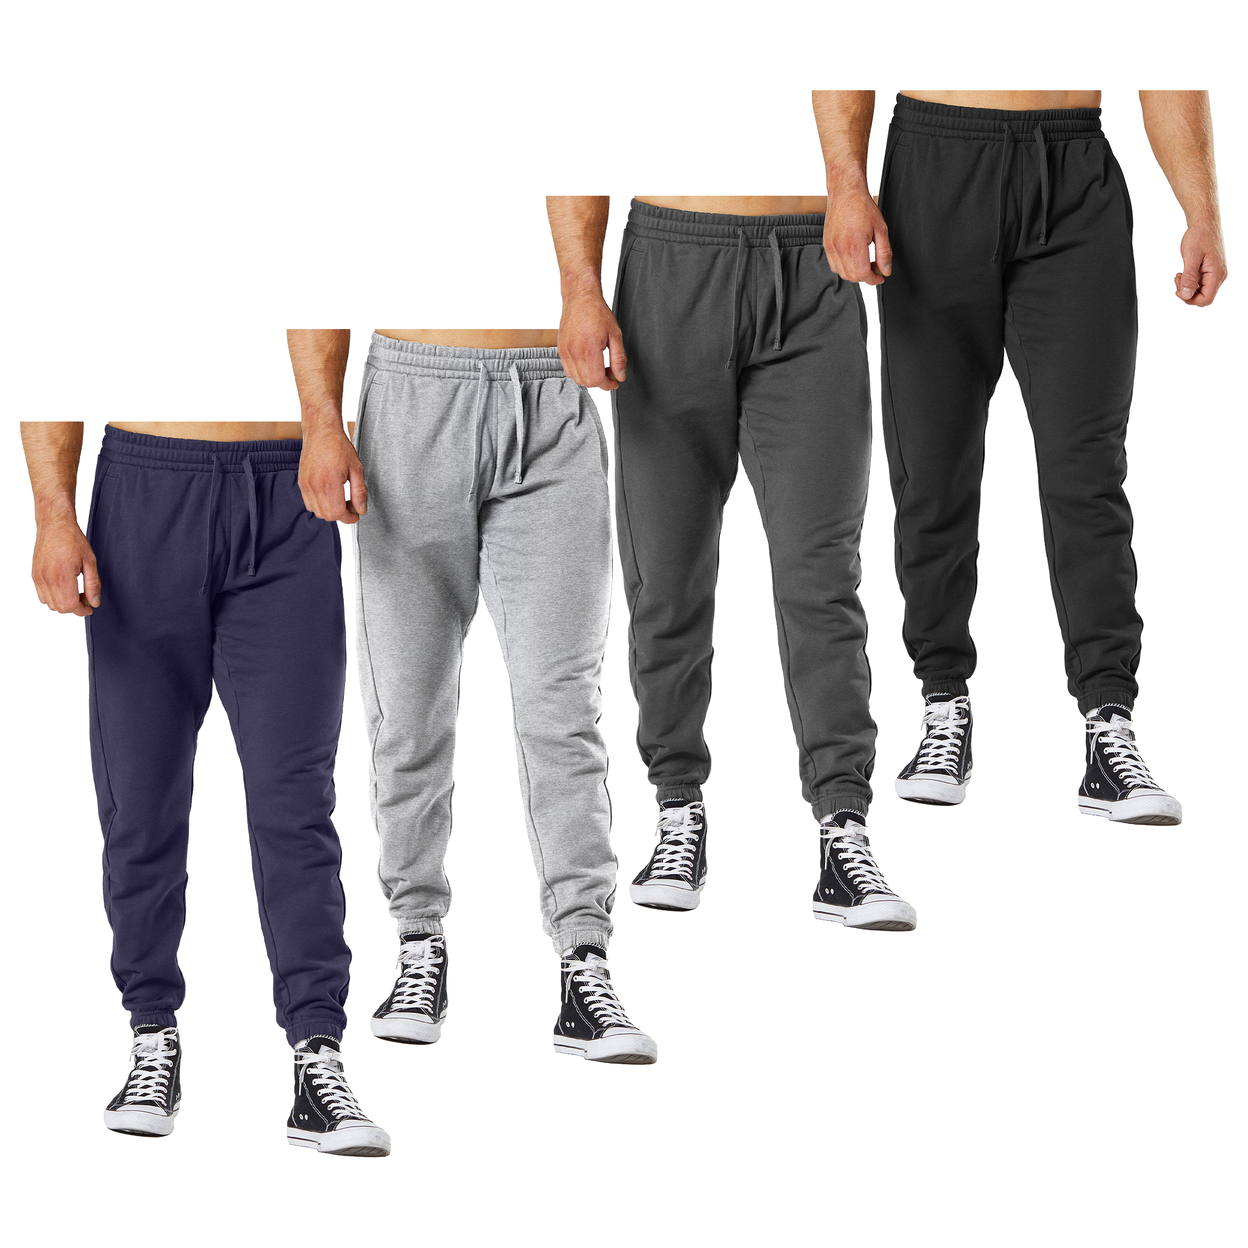 Multi-Pack: Men's Ultra-Soft Cozy Winter Warm Casual Fleece-Lined Sweatpants Jogger - 1-pack, X-large